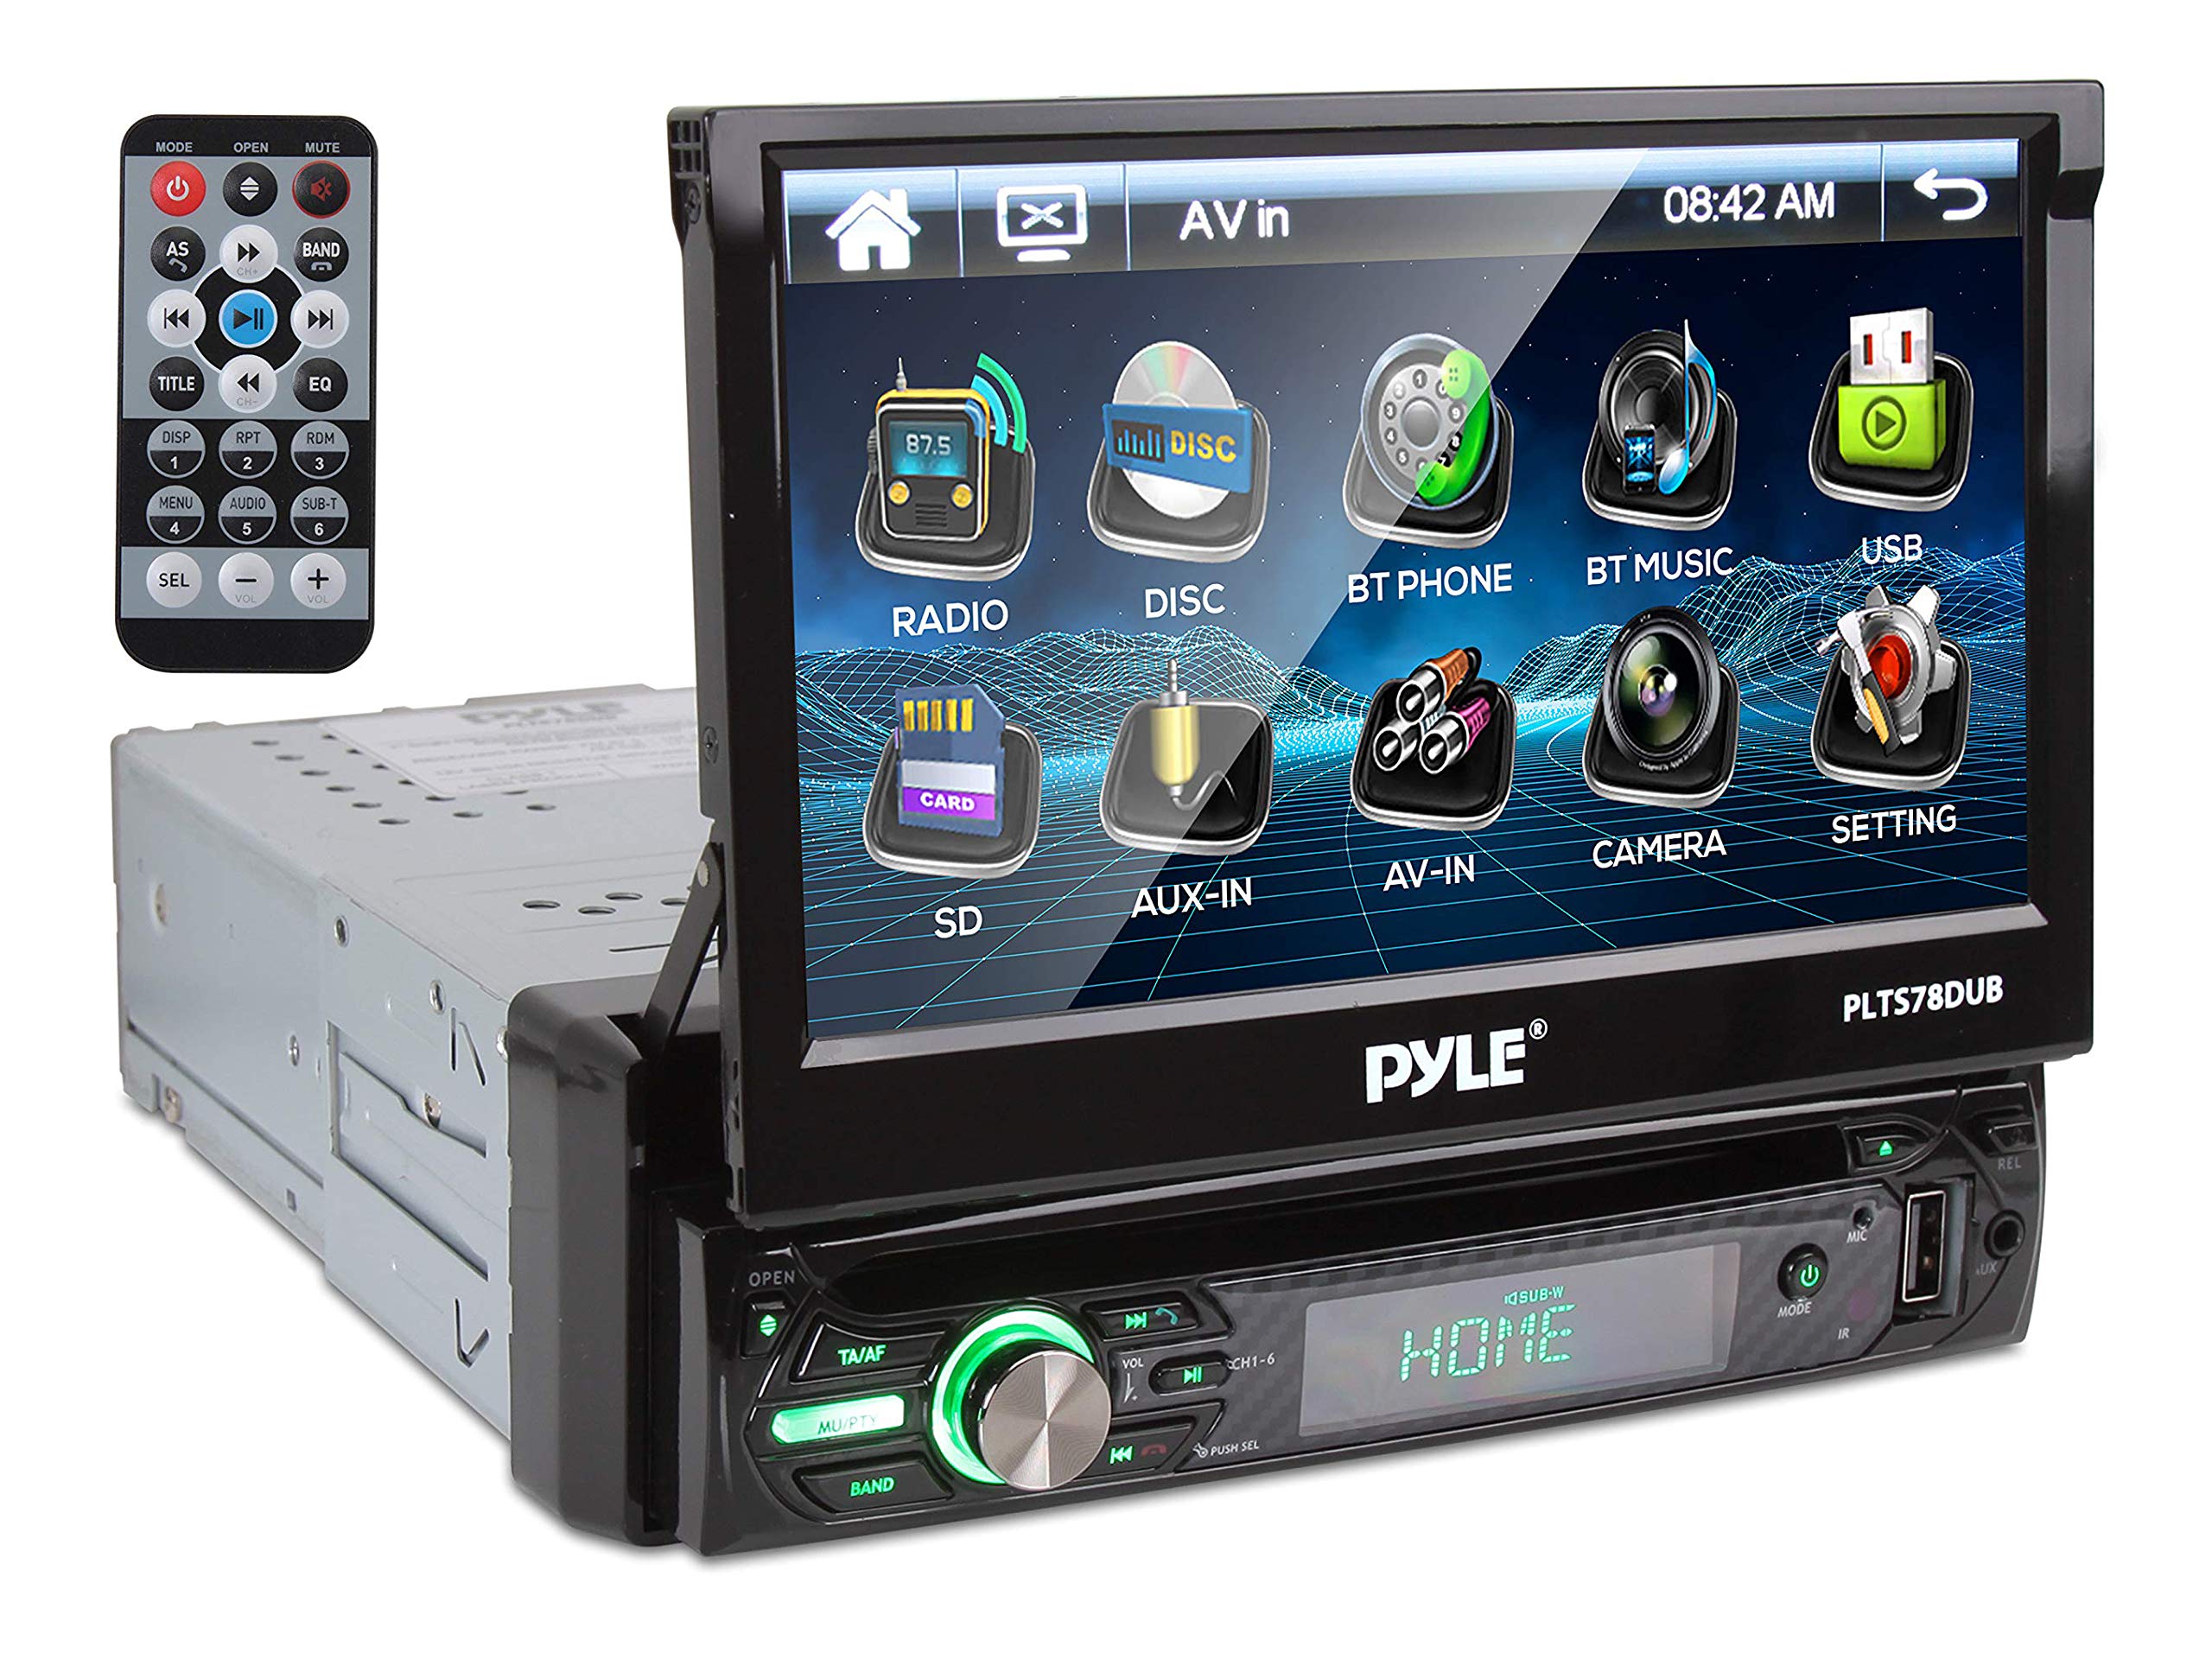  Pyle Single DIN Head Unit Receiver - In-Dash Car Stereo with 7” Multi-Color Touchscreen Display - Audio Video System with Bluetooth for Wireless Music Streaming & Hands-free Calling - PLTS78DUB,...